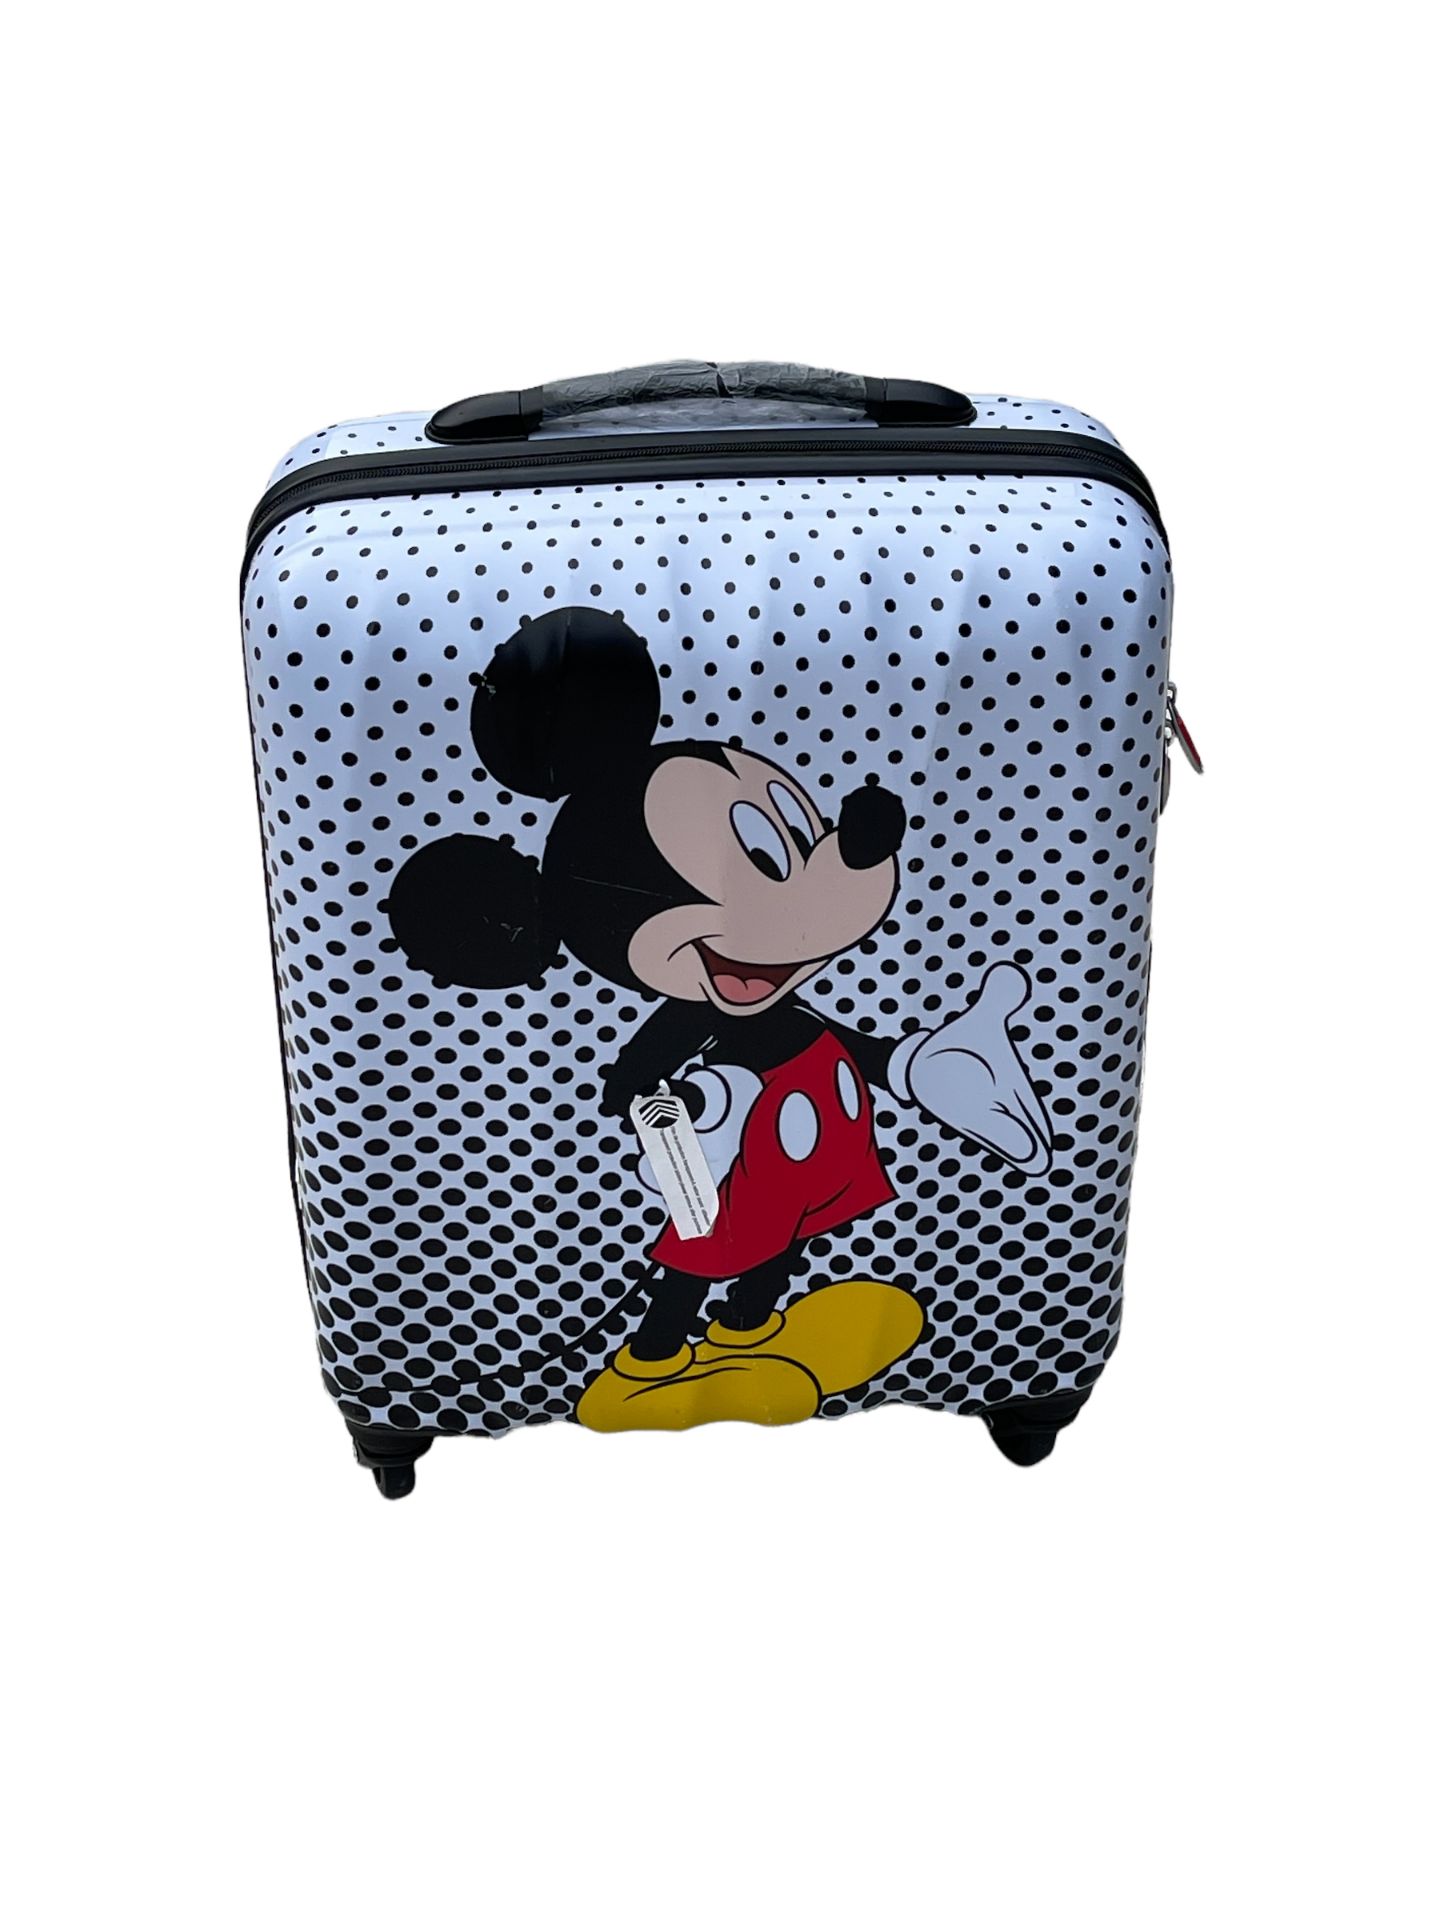 American Tourister Disney Mickey Mouse Polka Dot Carry-on Spinner Case 55cm - RRP £145 - Image 2 of 9